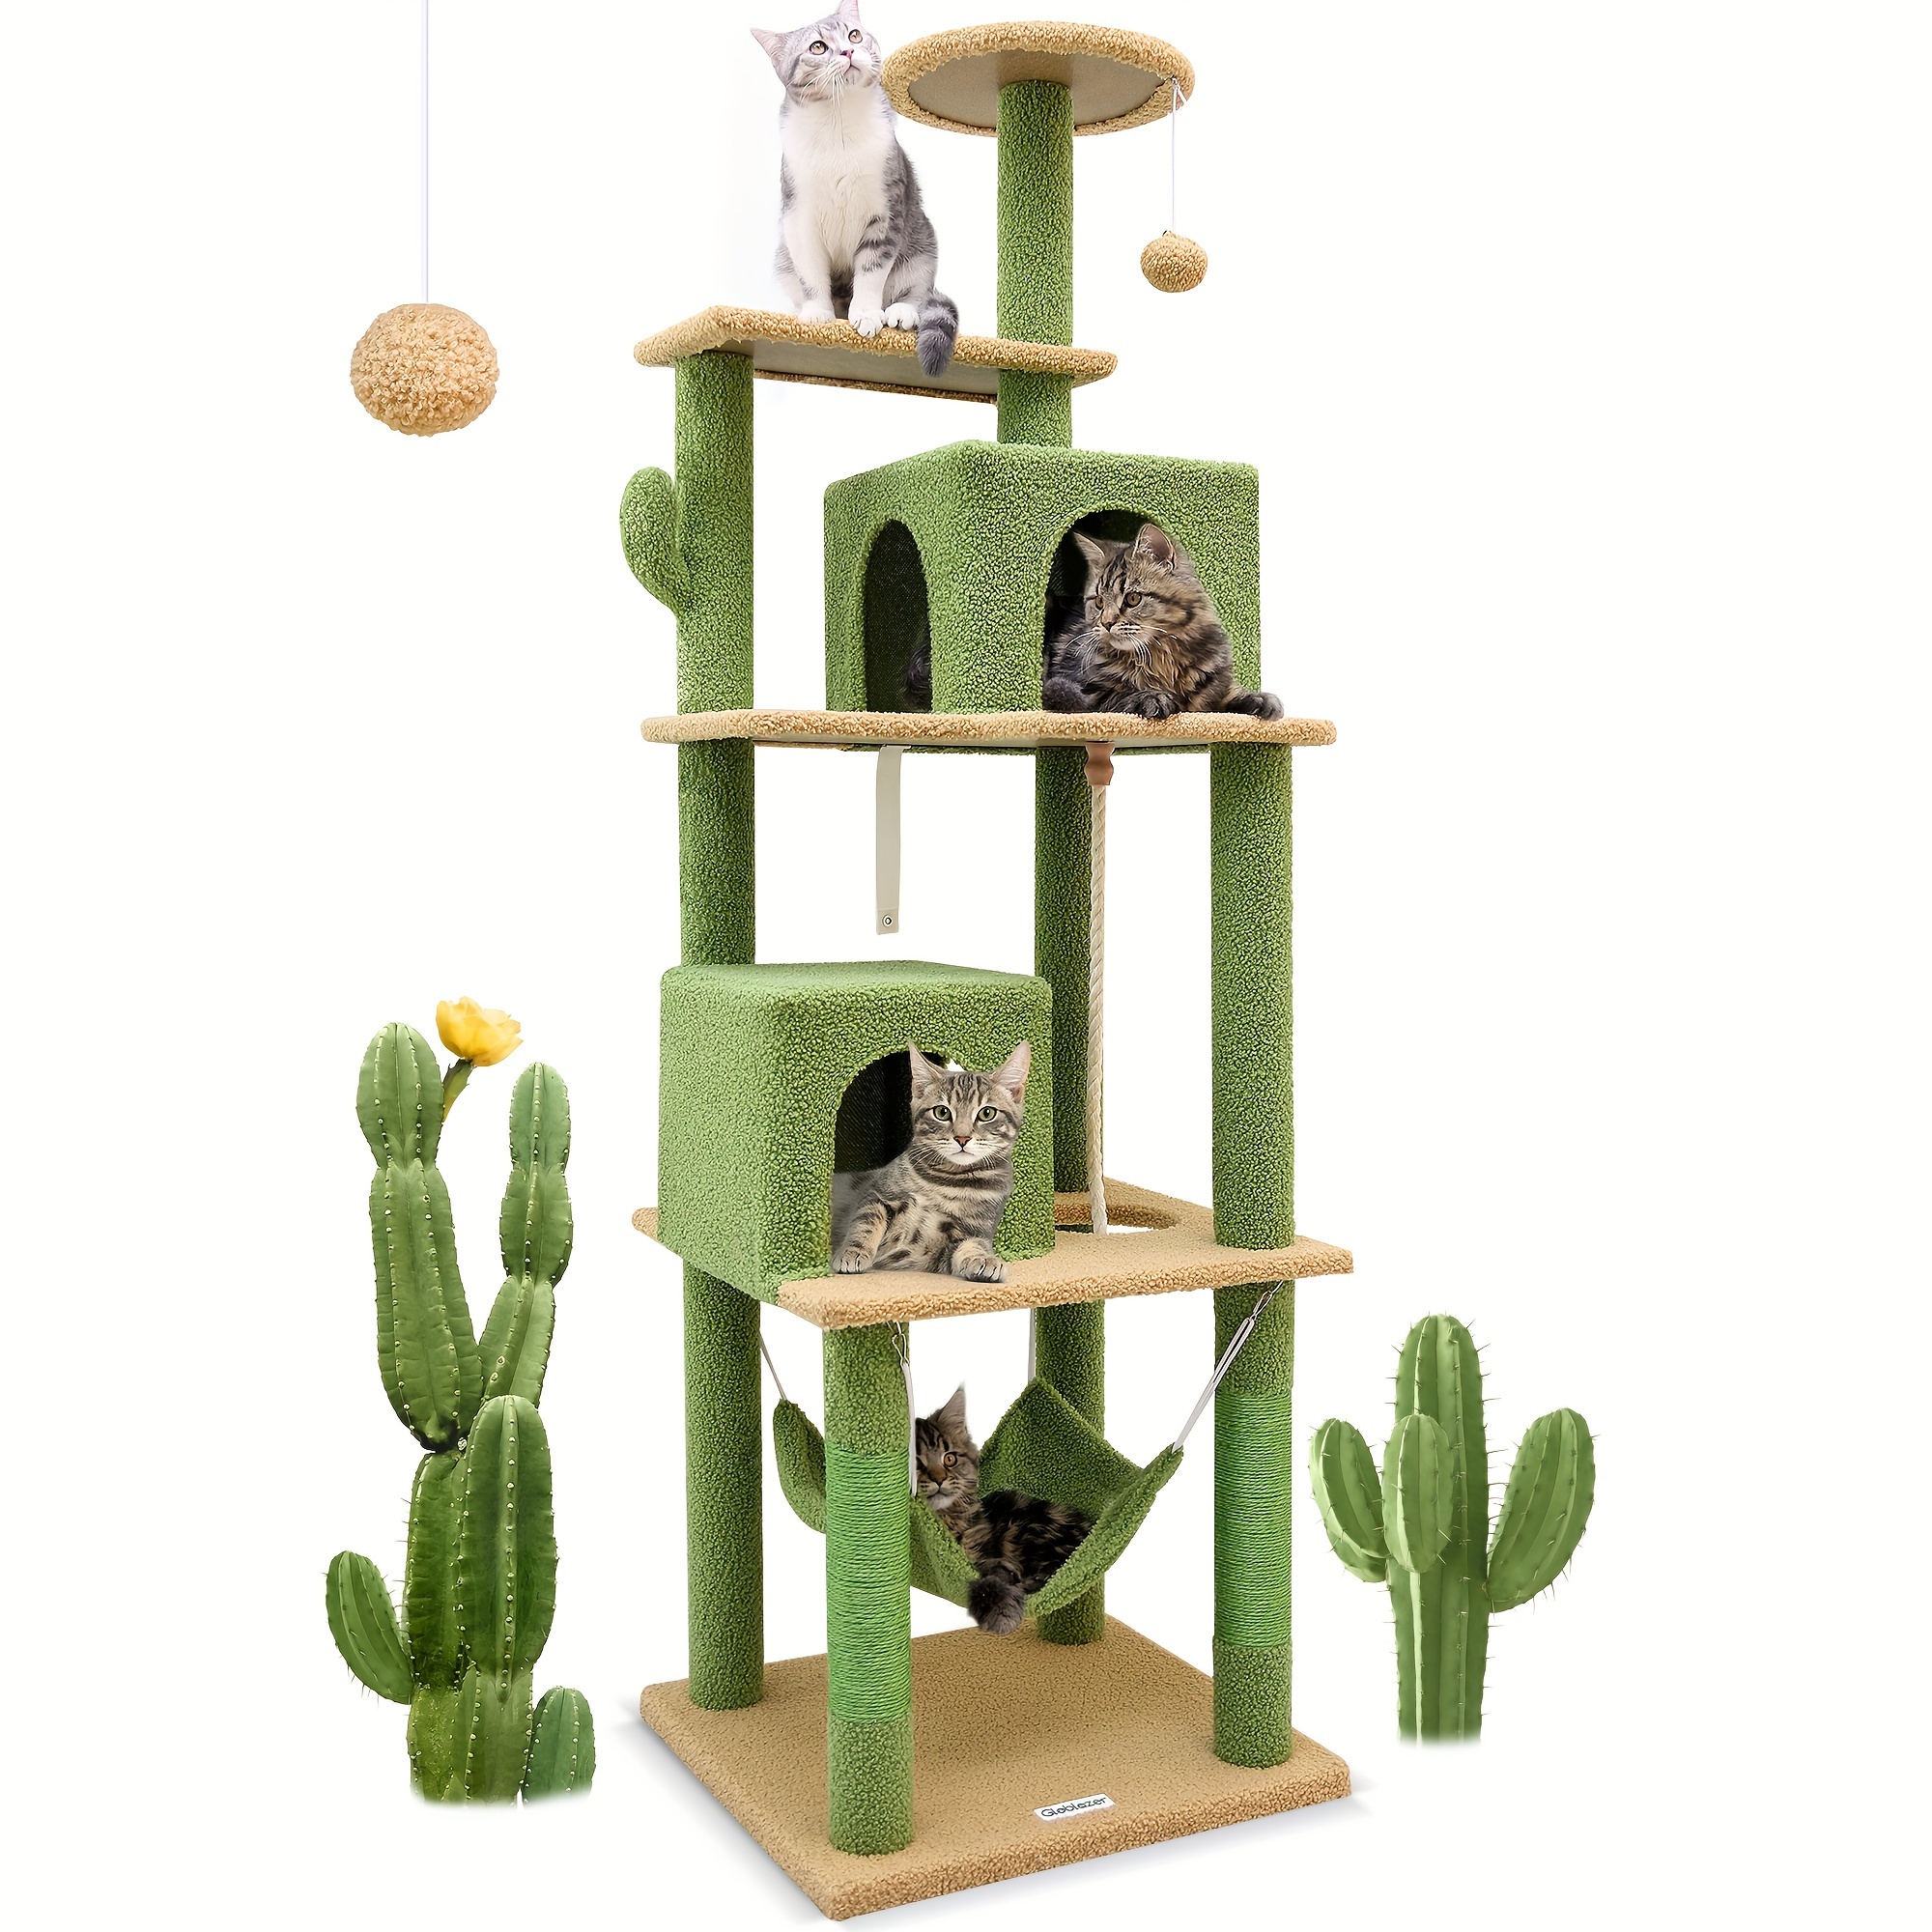 

Cactus Design Cat Tree Tower For Indoor Multiple Cats, 61.8in Cat Tree Climbing Tower With 2 Large Cat Condo, Hammock, 2 Platform, Sisal Scratching Post For Indoor Cats #globlazer